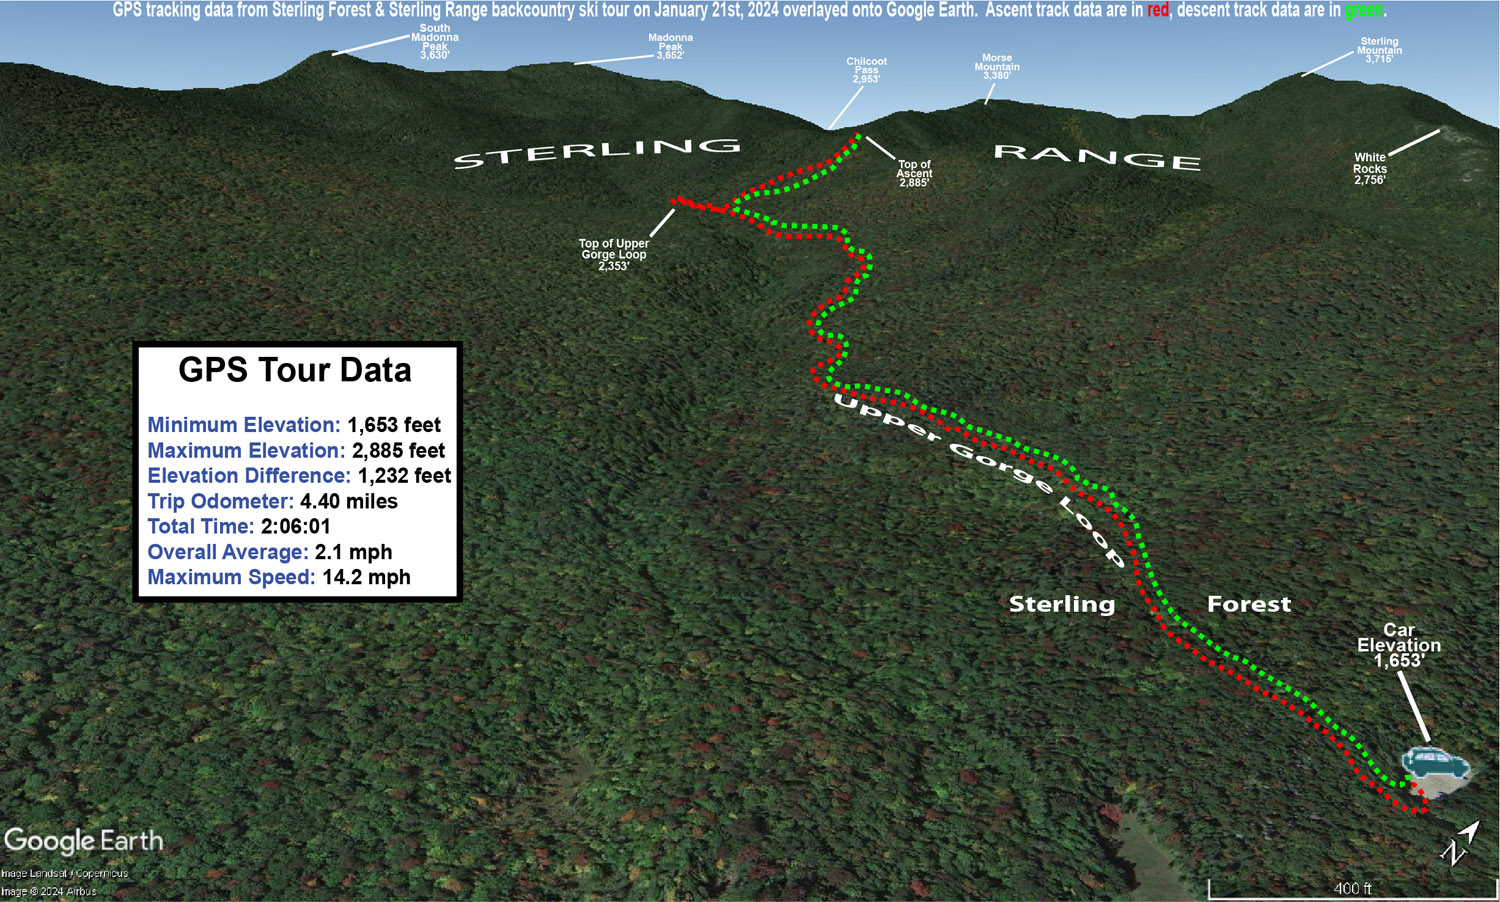 A Google Earth map with GPS tracking data for a backcountry ski tour in the Sterling Forest area and Sterling Range in the Northern Green Mountains of Vermont